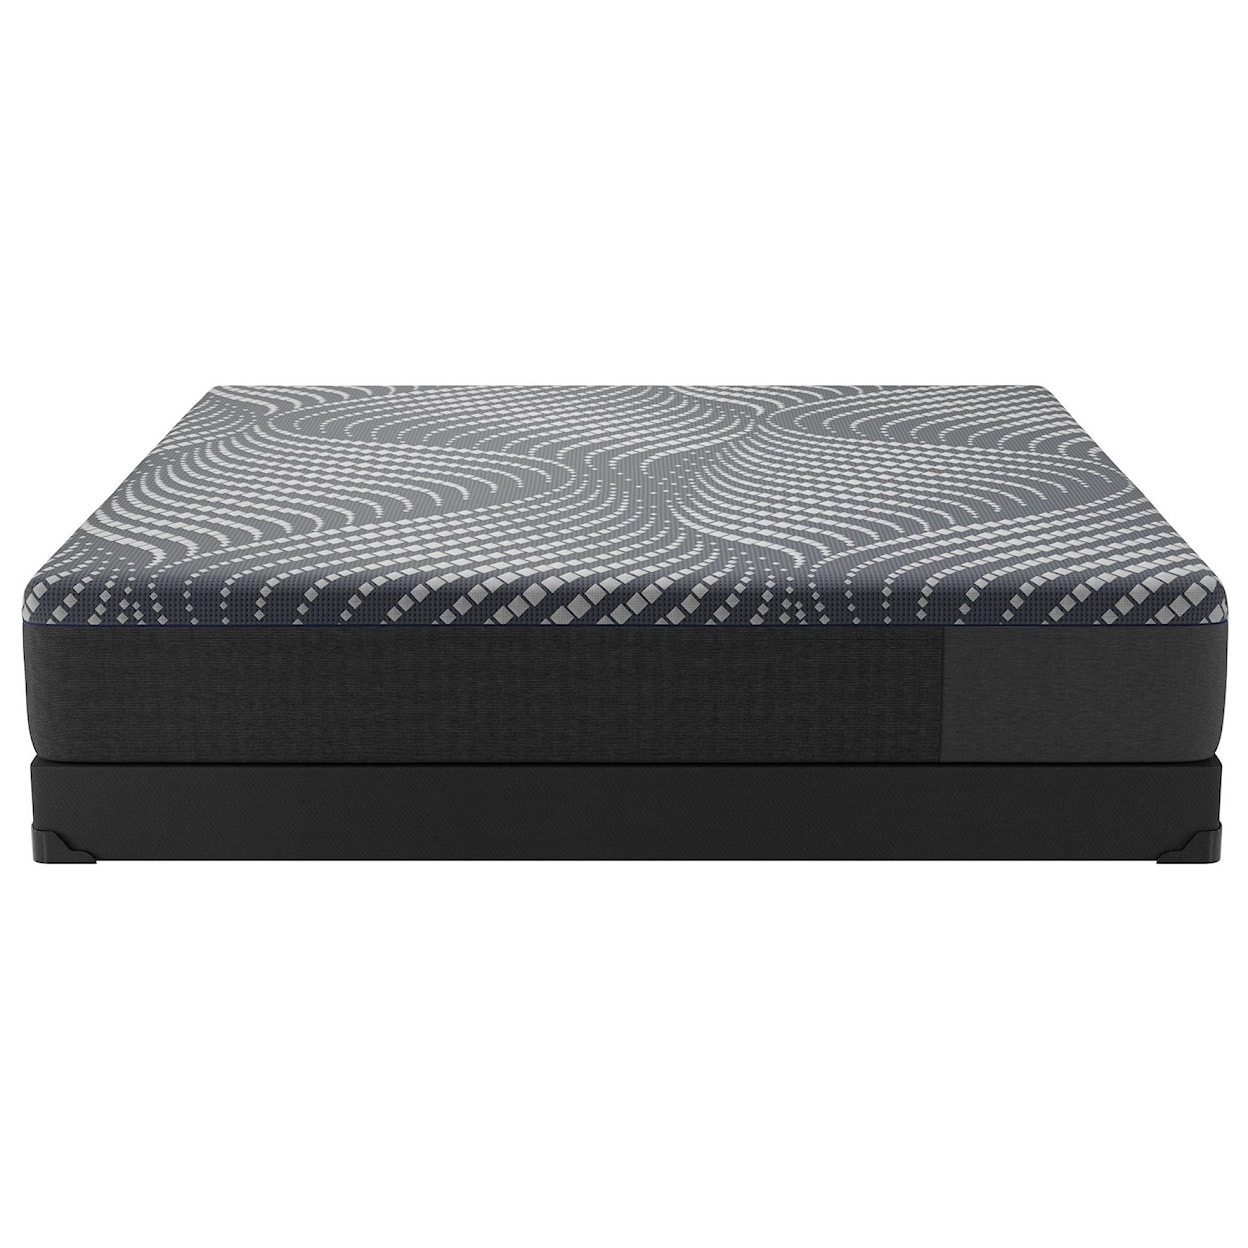 Sealy Sealy Hybrid Queen Albany Hybrid Mattress+LoPro Base